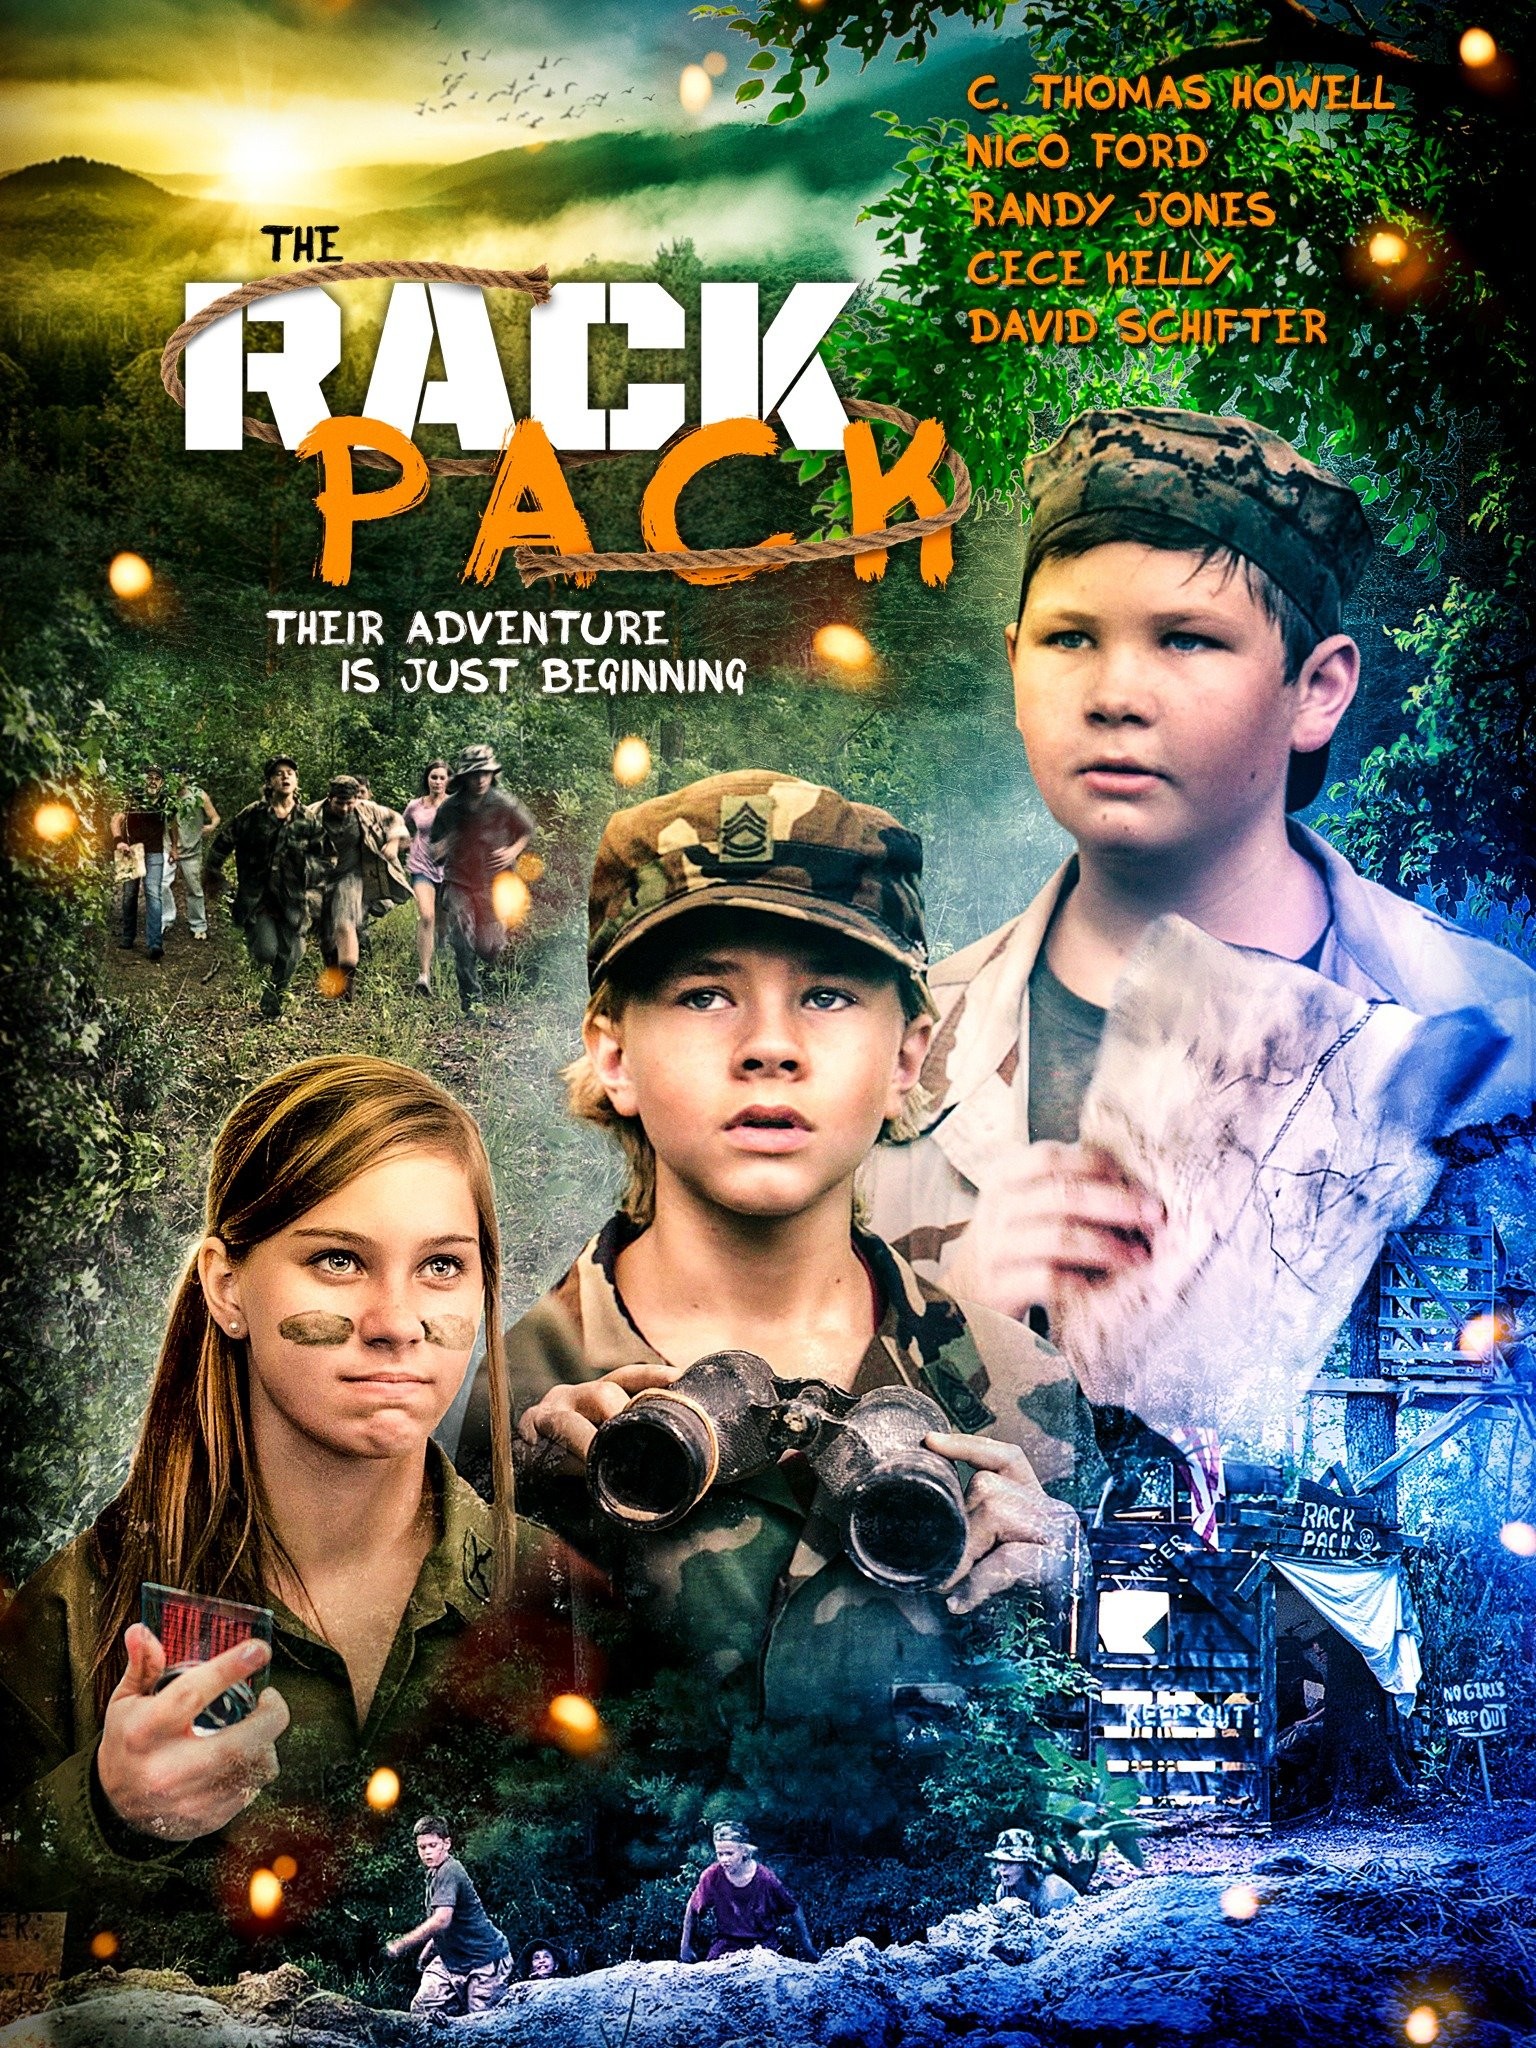 BBC Two - The Rack Pack